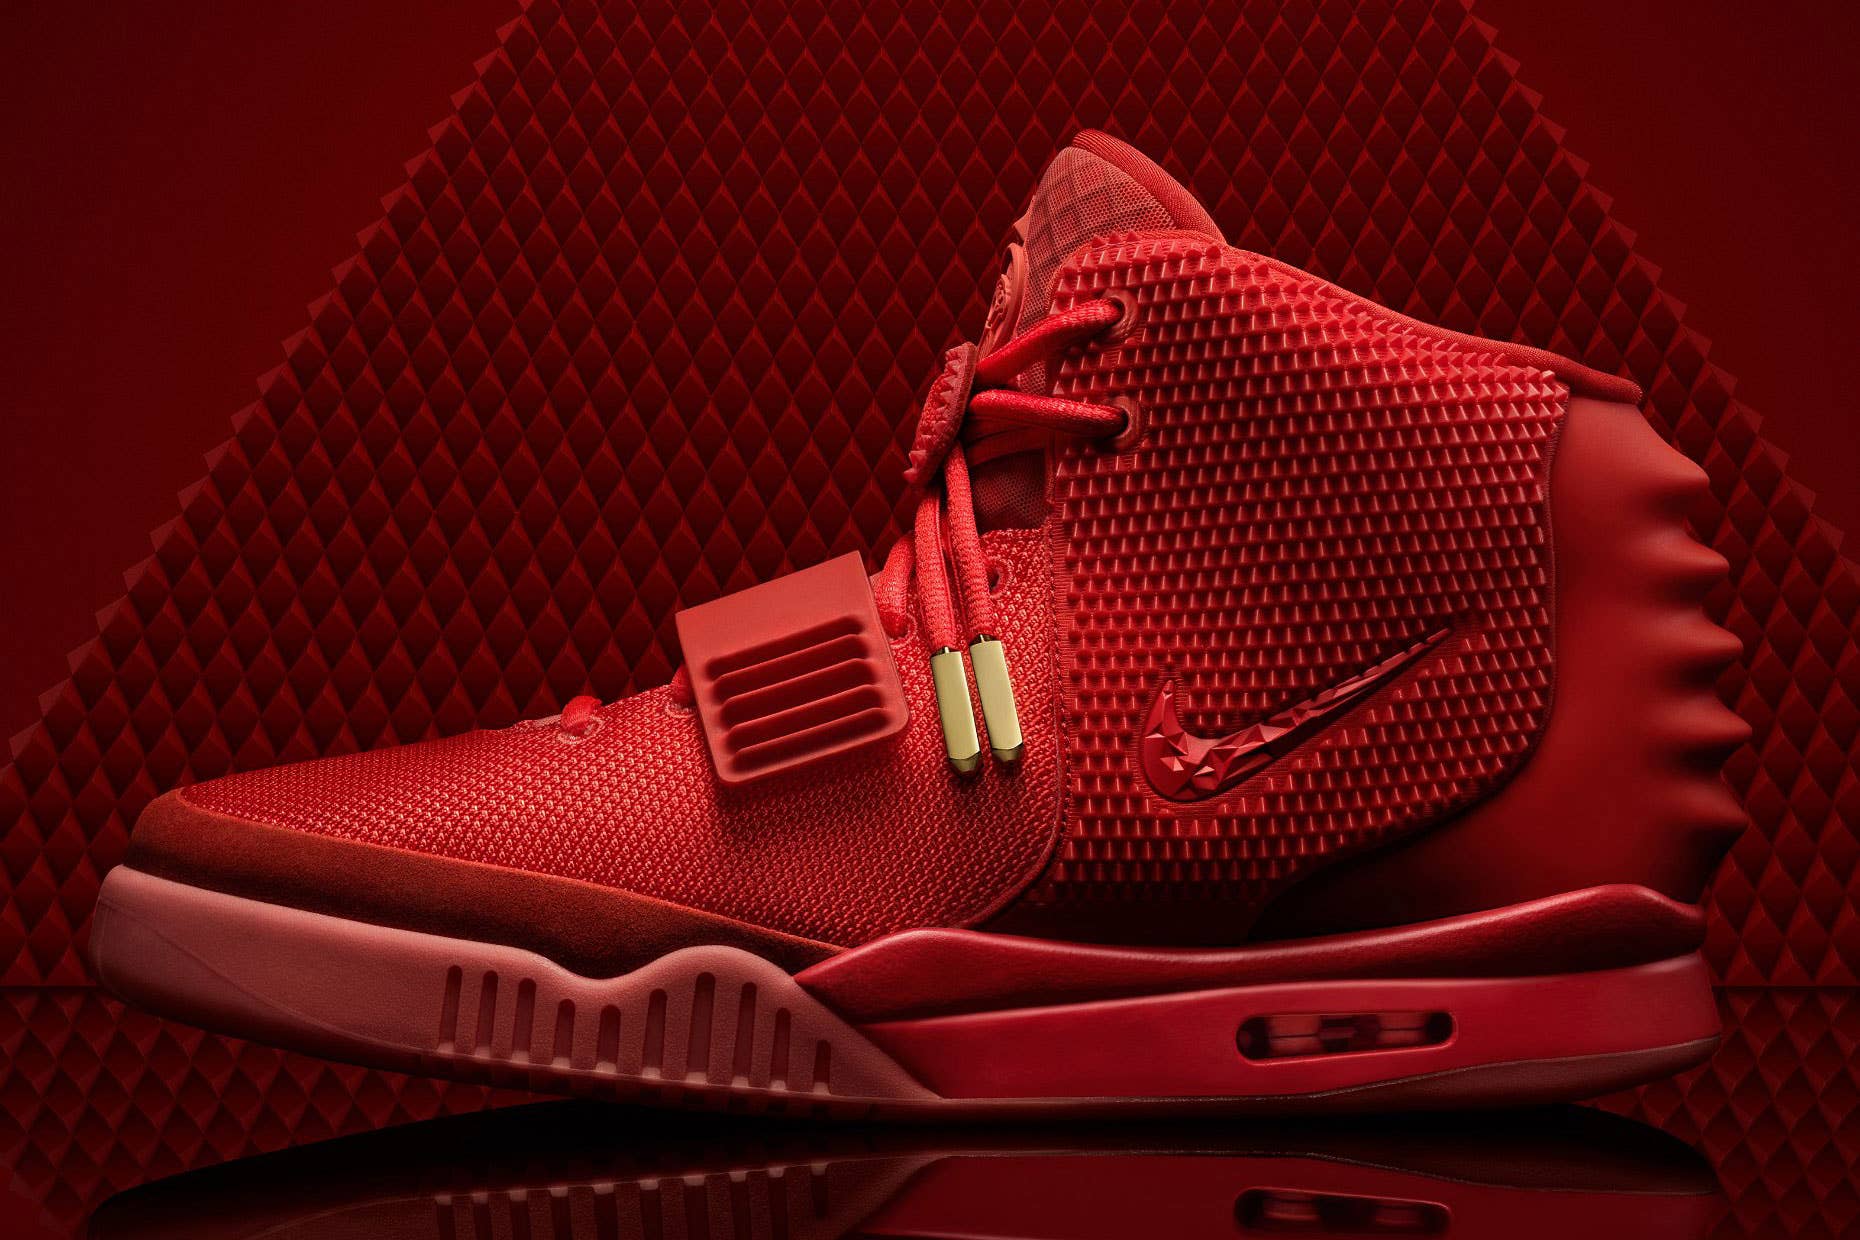 seng automat Derivation How the "Red October" Became The Most Talked About Sneakers Ever | Complex